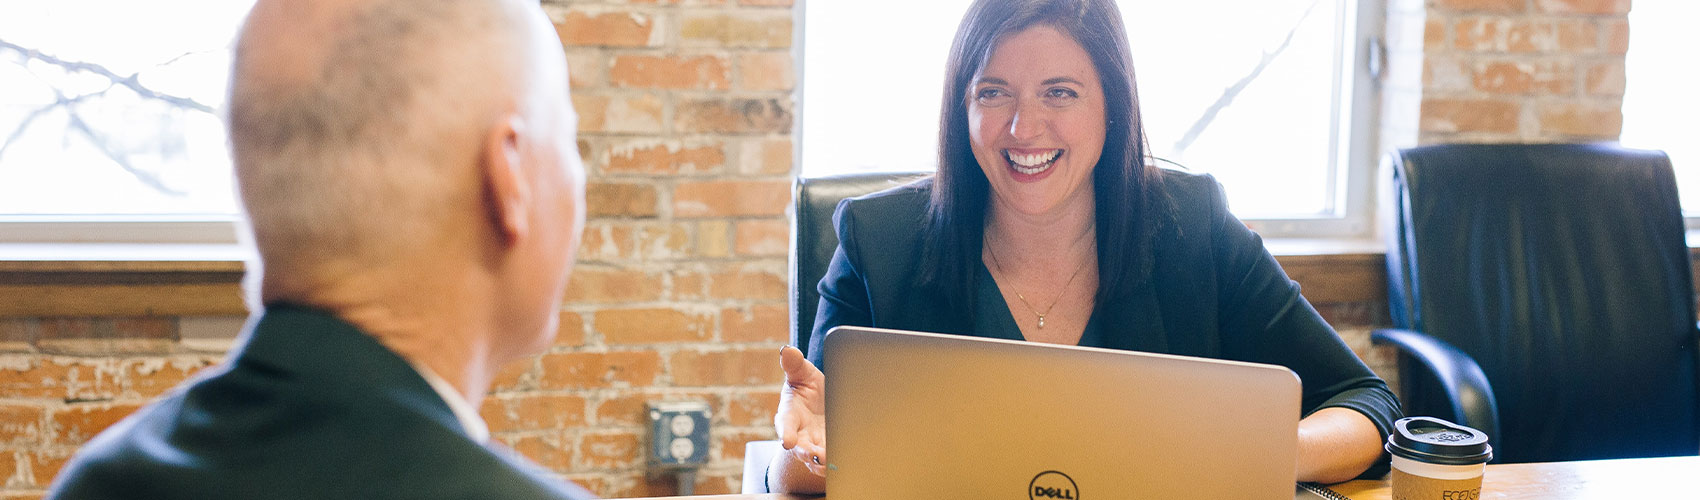 A career consultant sitting at a desk with a laptop and coffee cup, while smiling and chatting with an employer connection